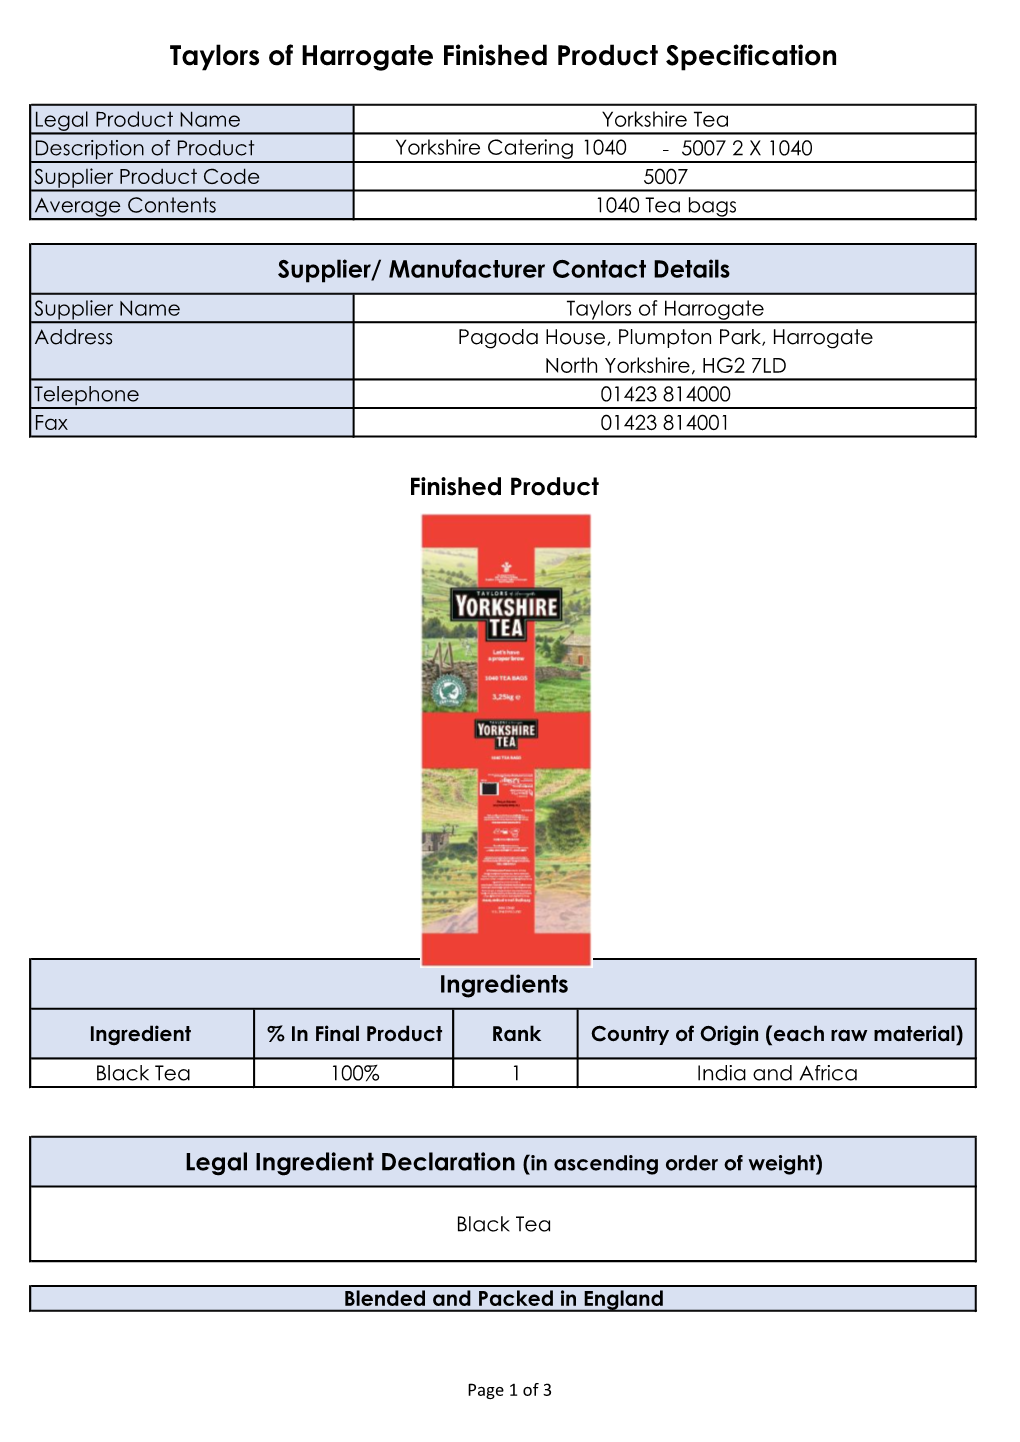 Yorkshire Tea Description of Product Yorkshire Catering 1040 - 5007 2 X 1040 Supplier Product Code 5007 Average Contents 1040 Tea Bags